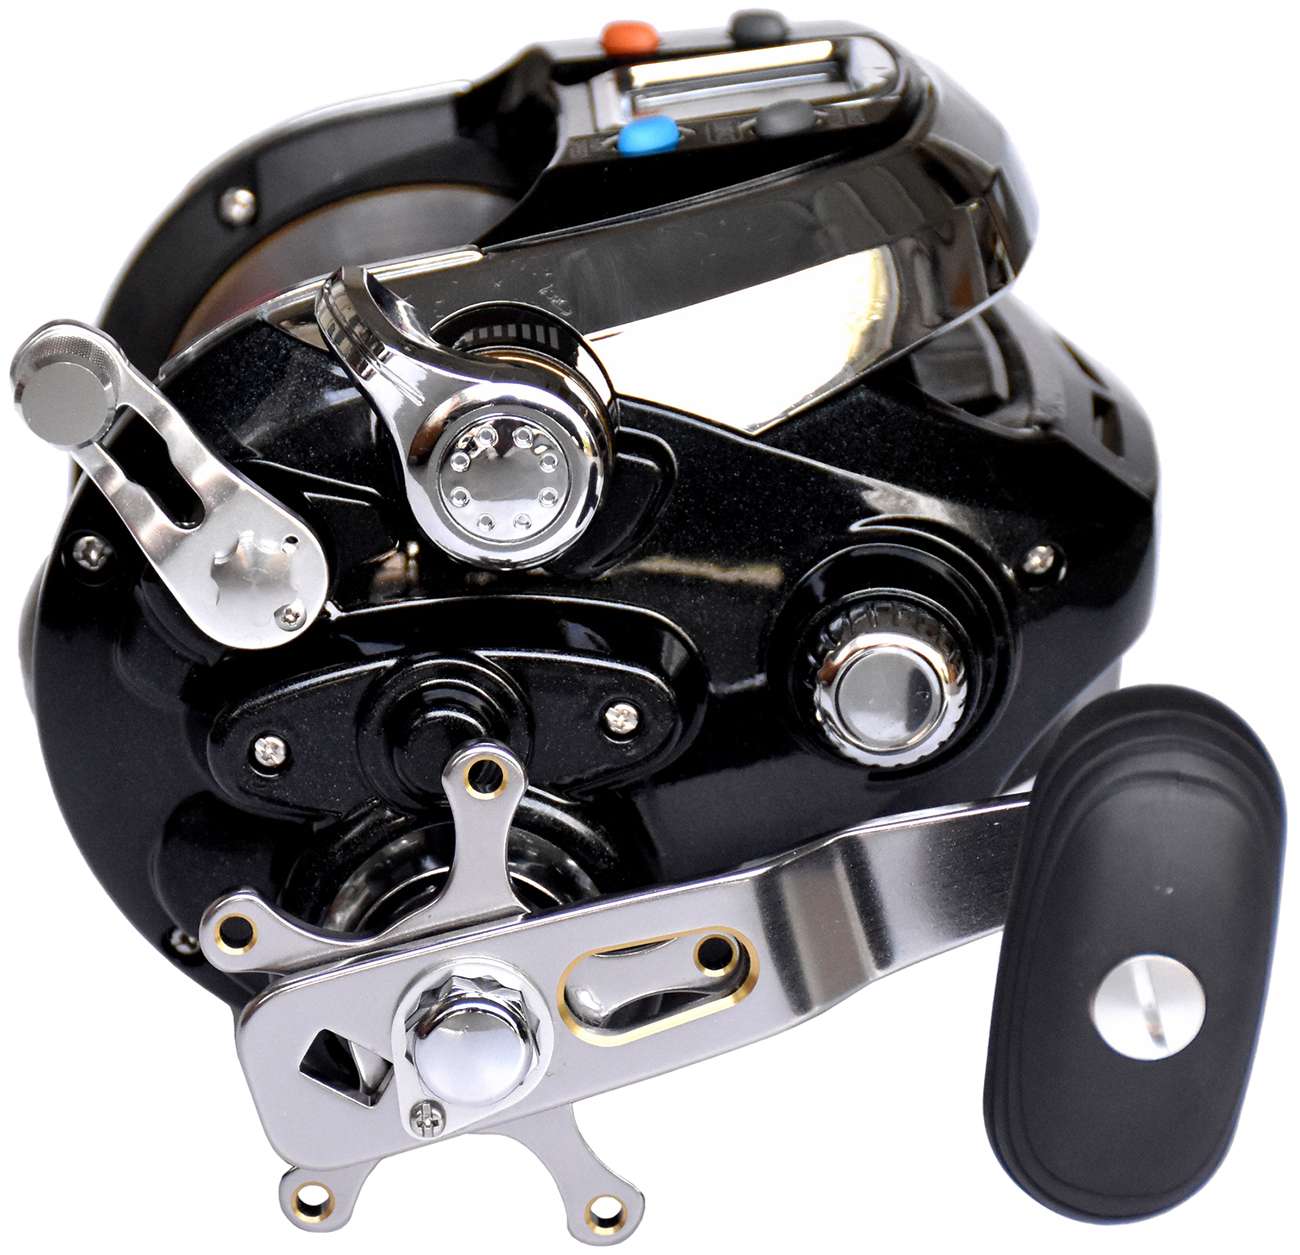 BANAX KAIGEN 150Z 150S ELECTRIC FISHING REEL RIGHT HAND